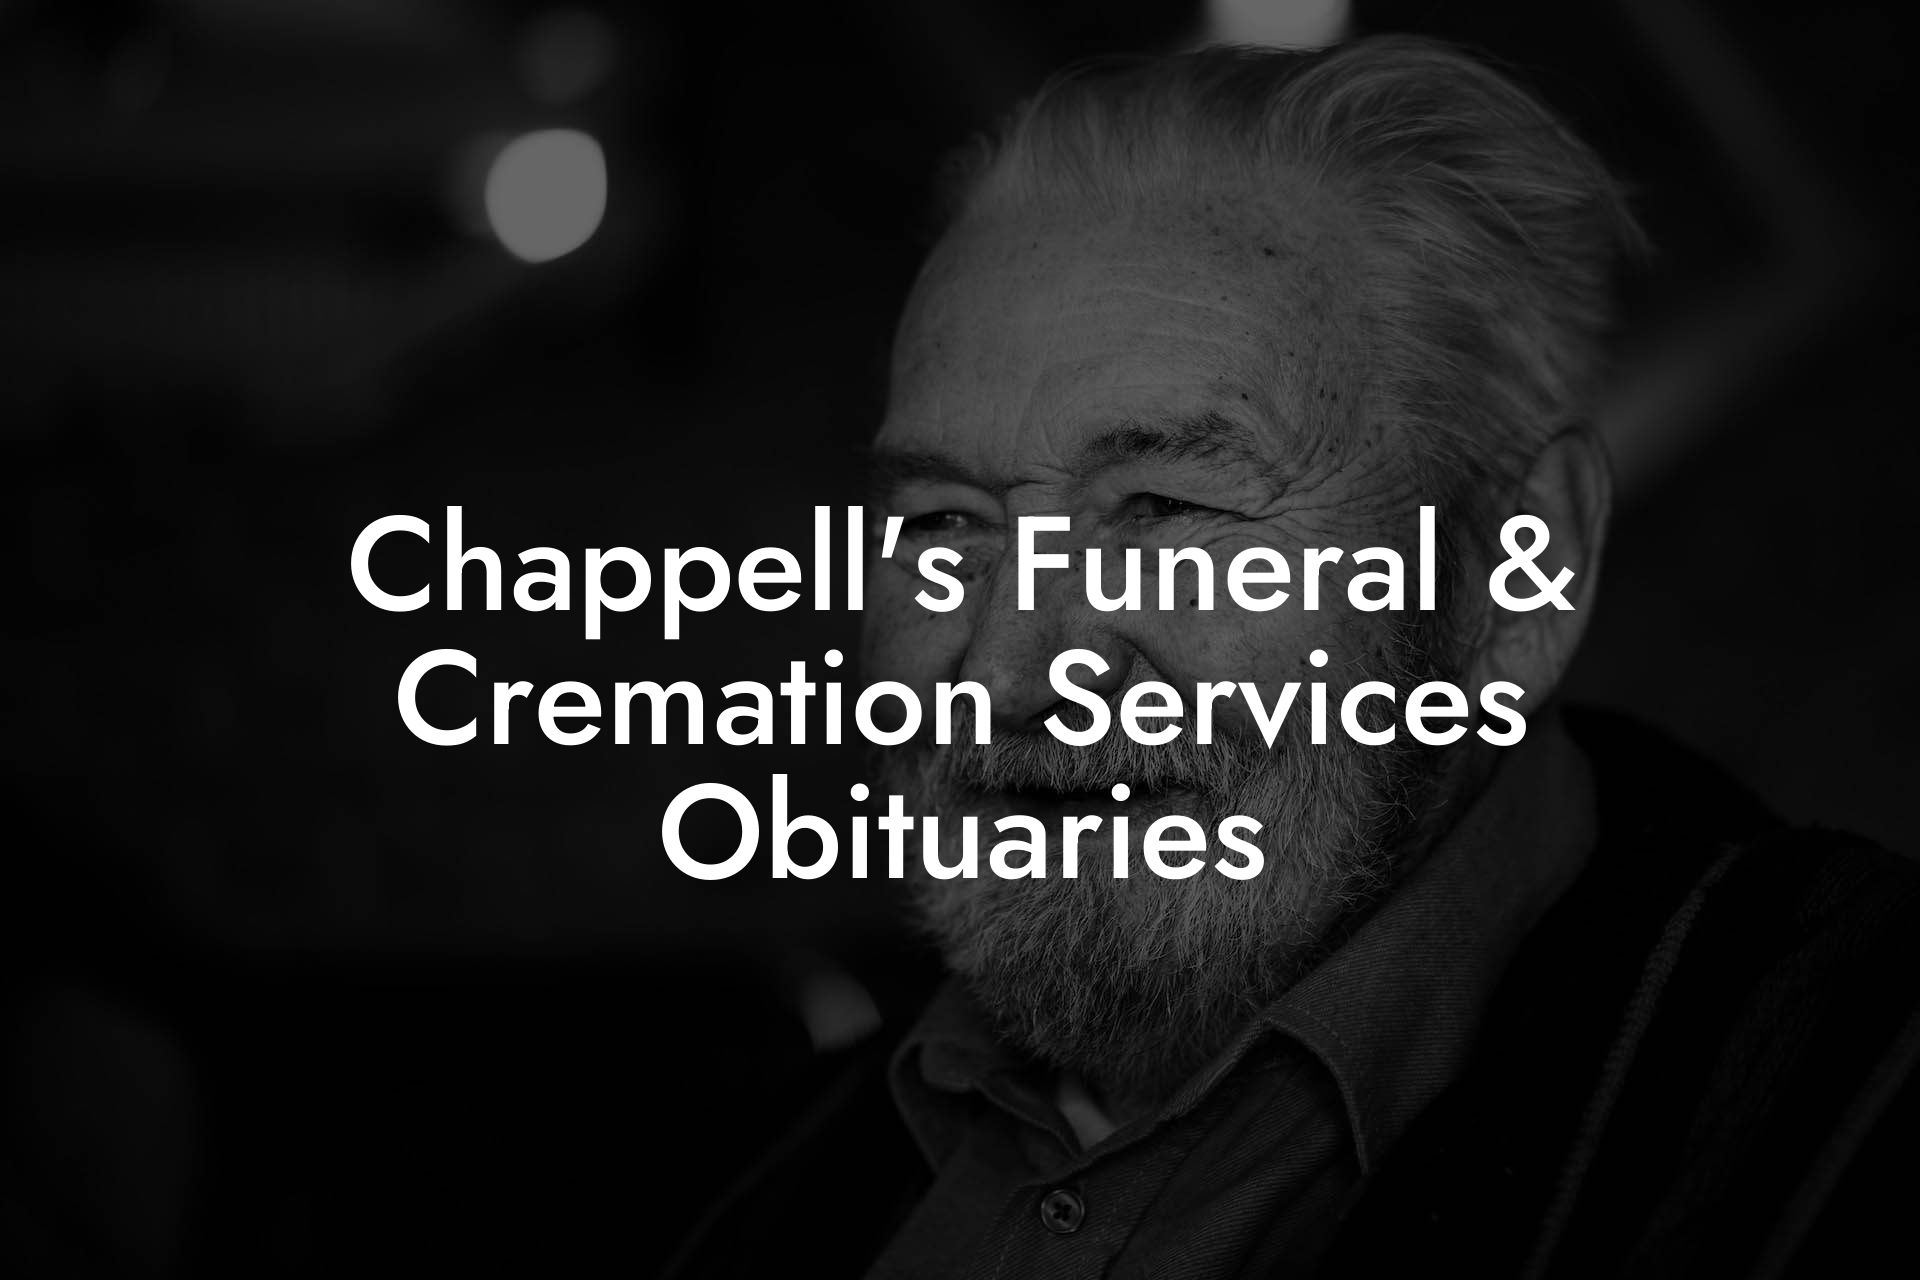 Chappell's Funeral & Cremation Services Obituaries